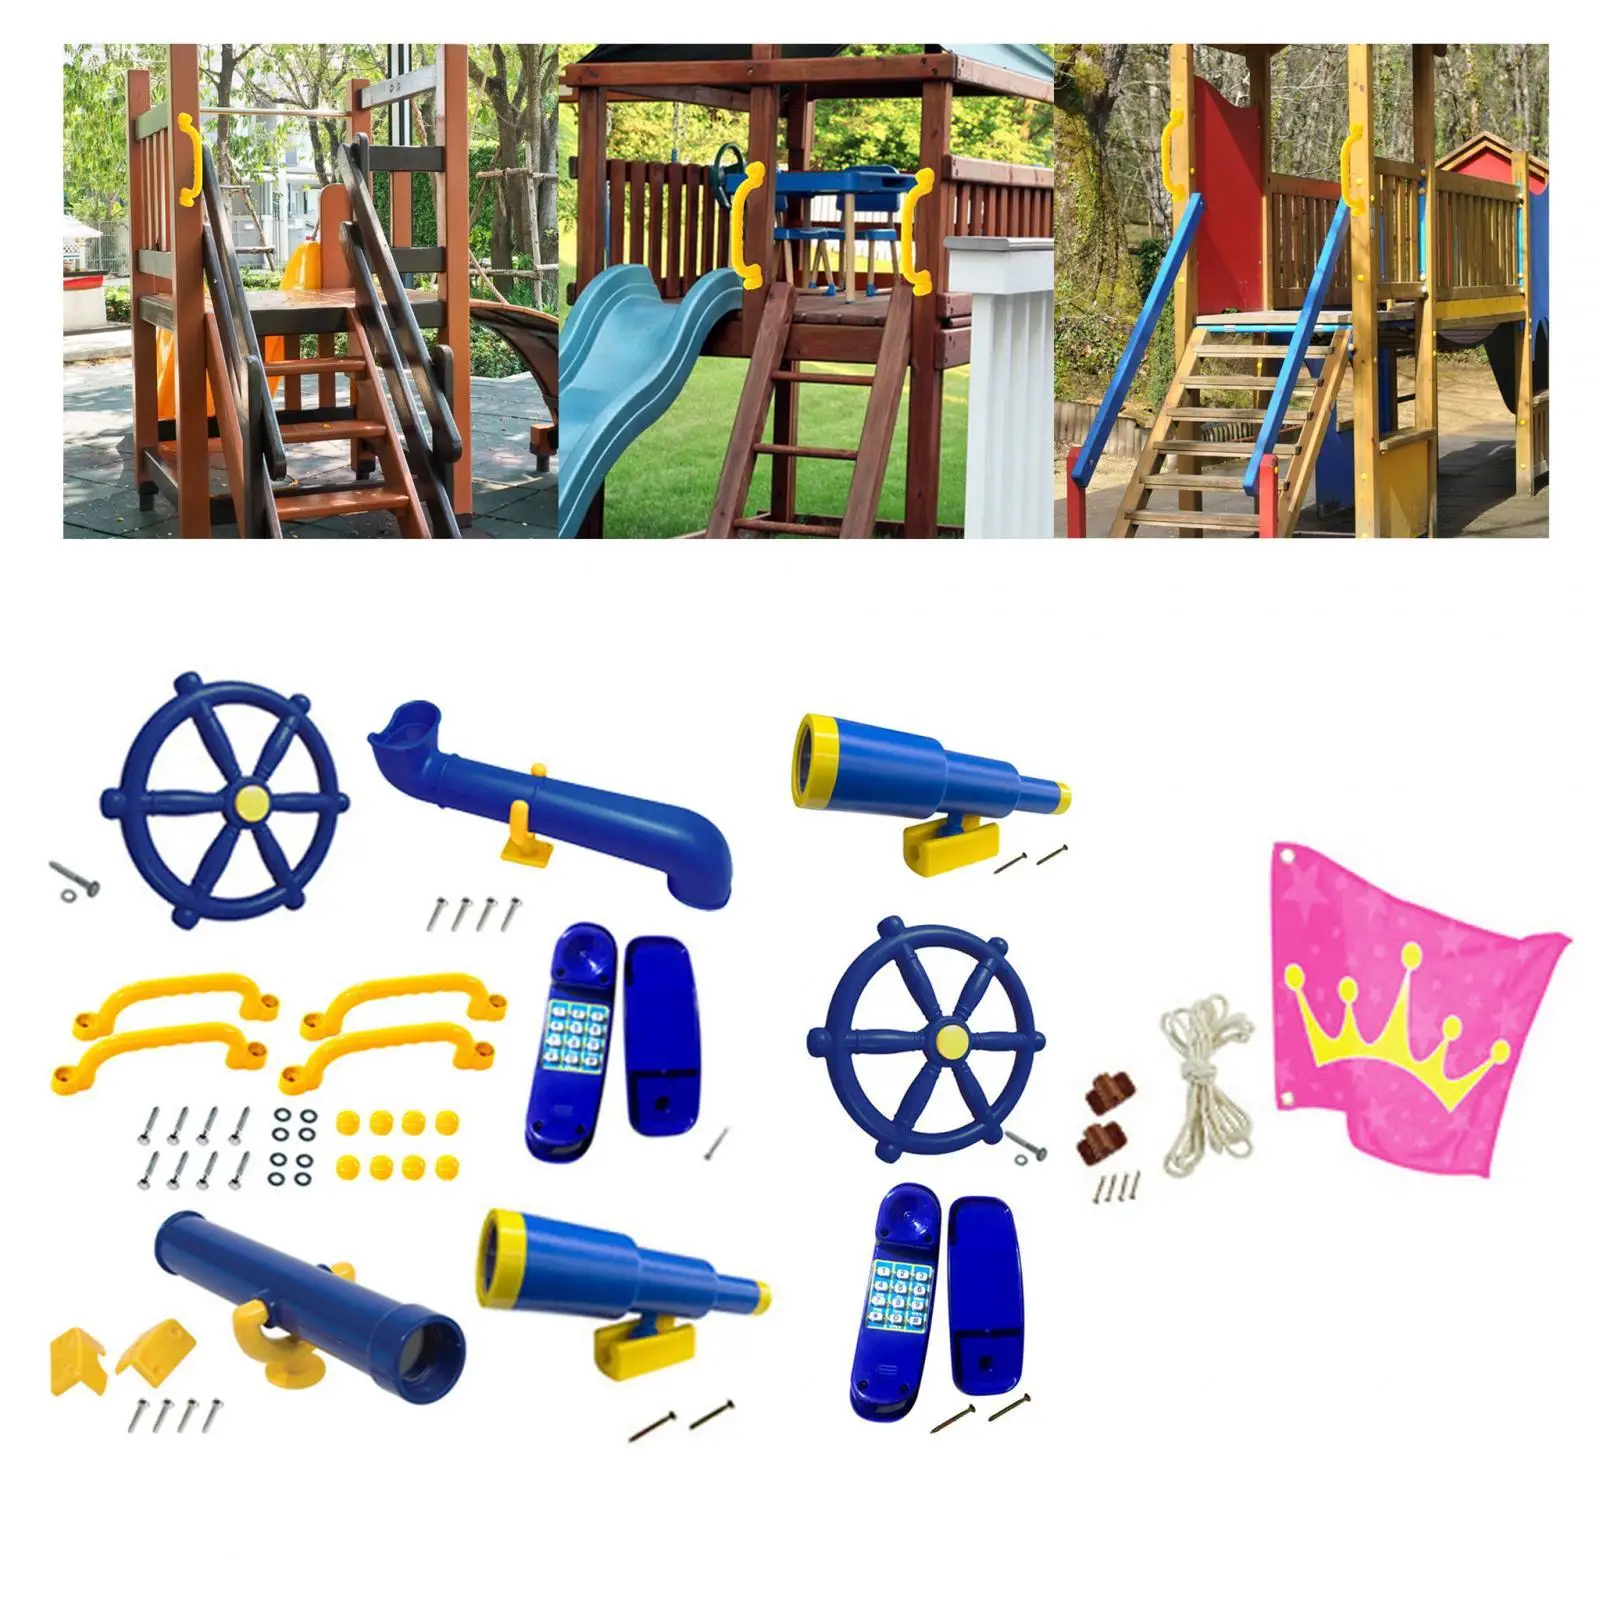 Playground Accessories Easy to Install Swing Playground Accessories for Backyard Swingset Tree House Holiday Gifts